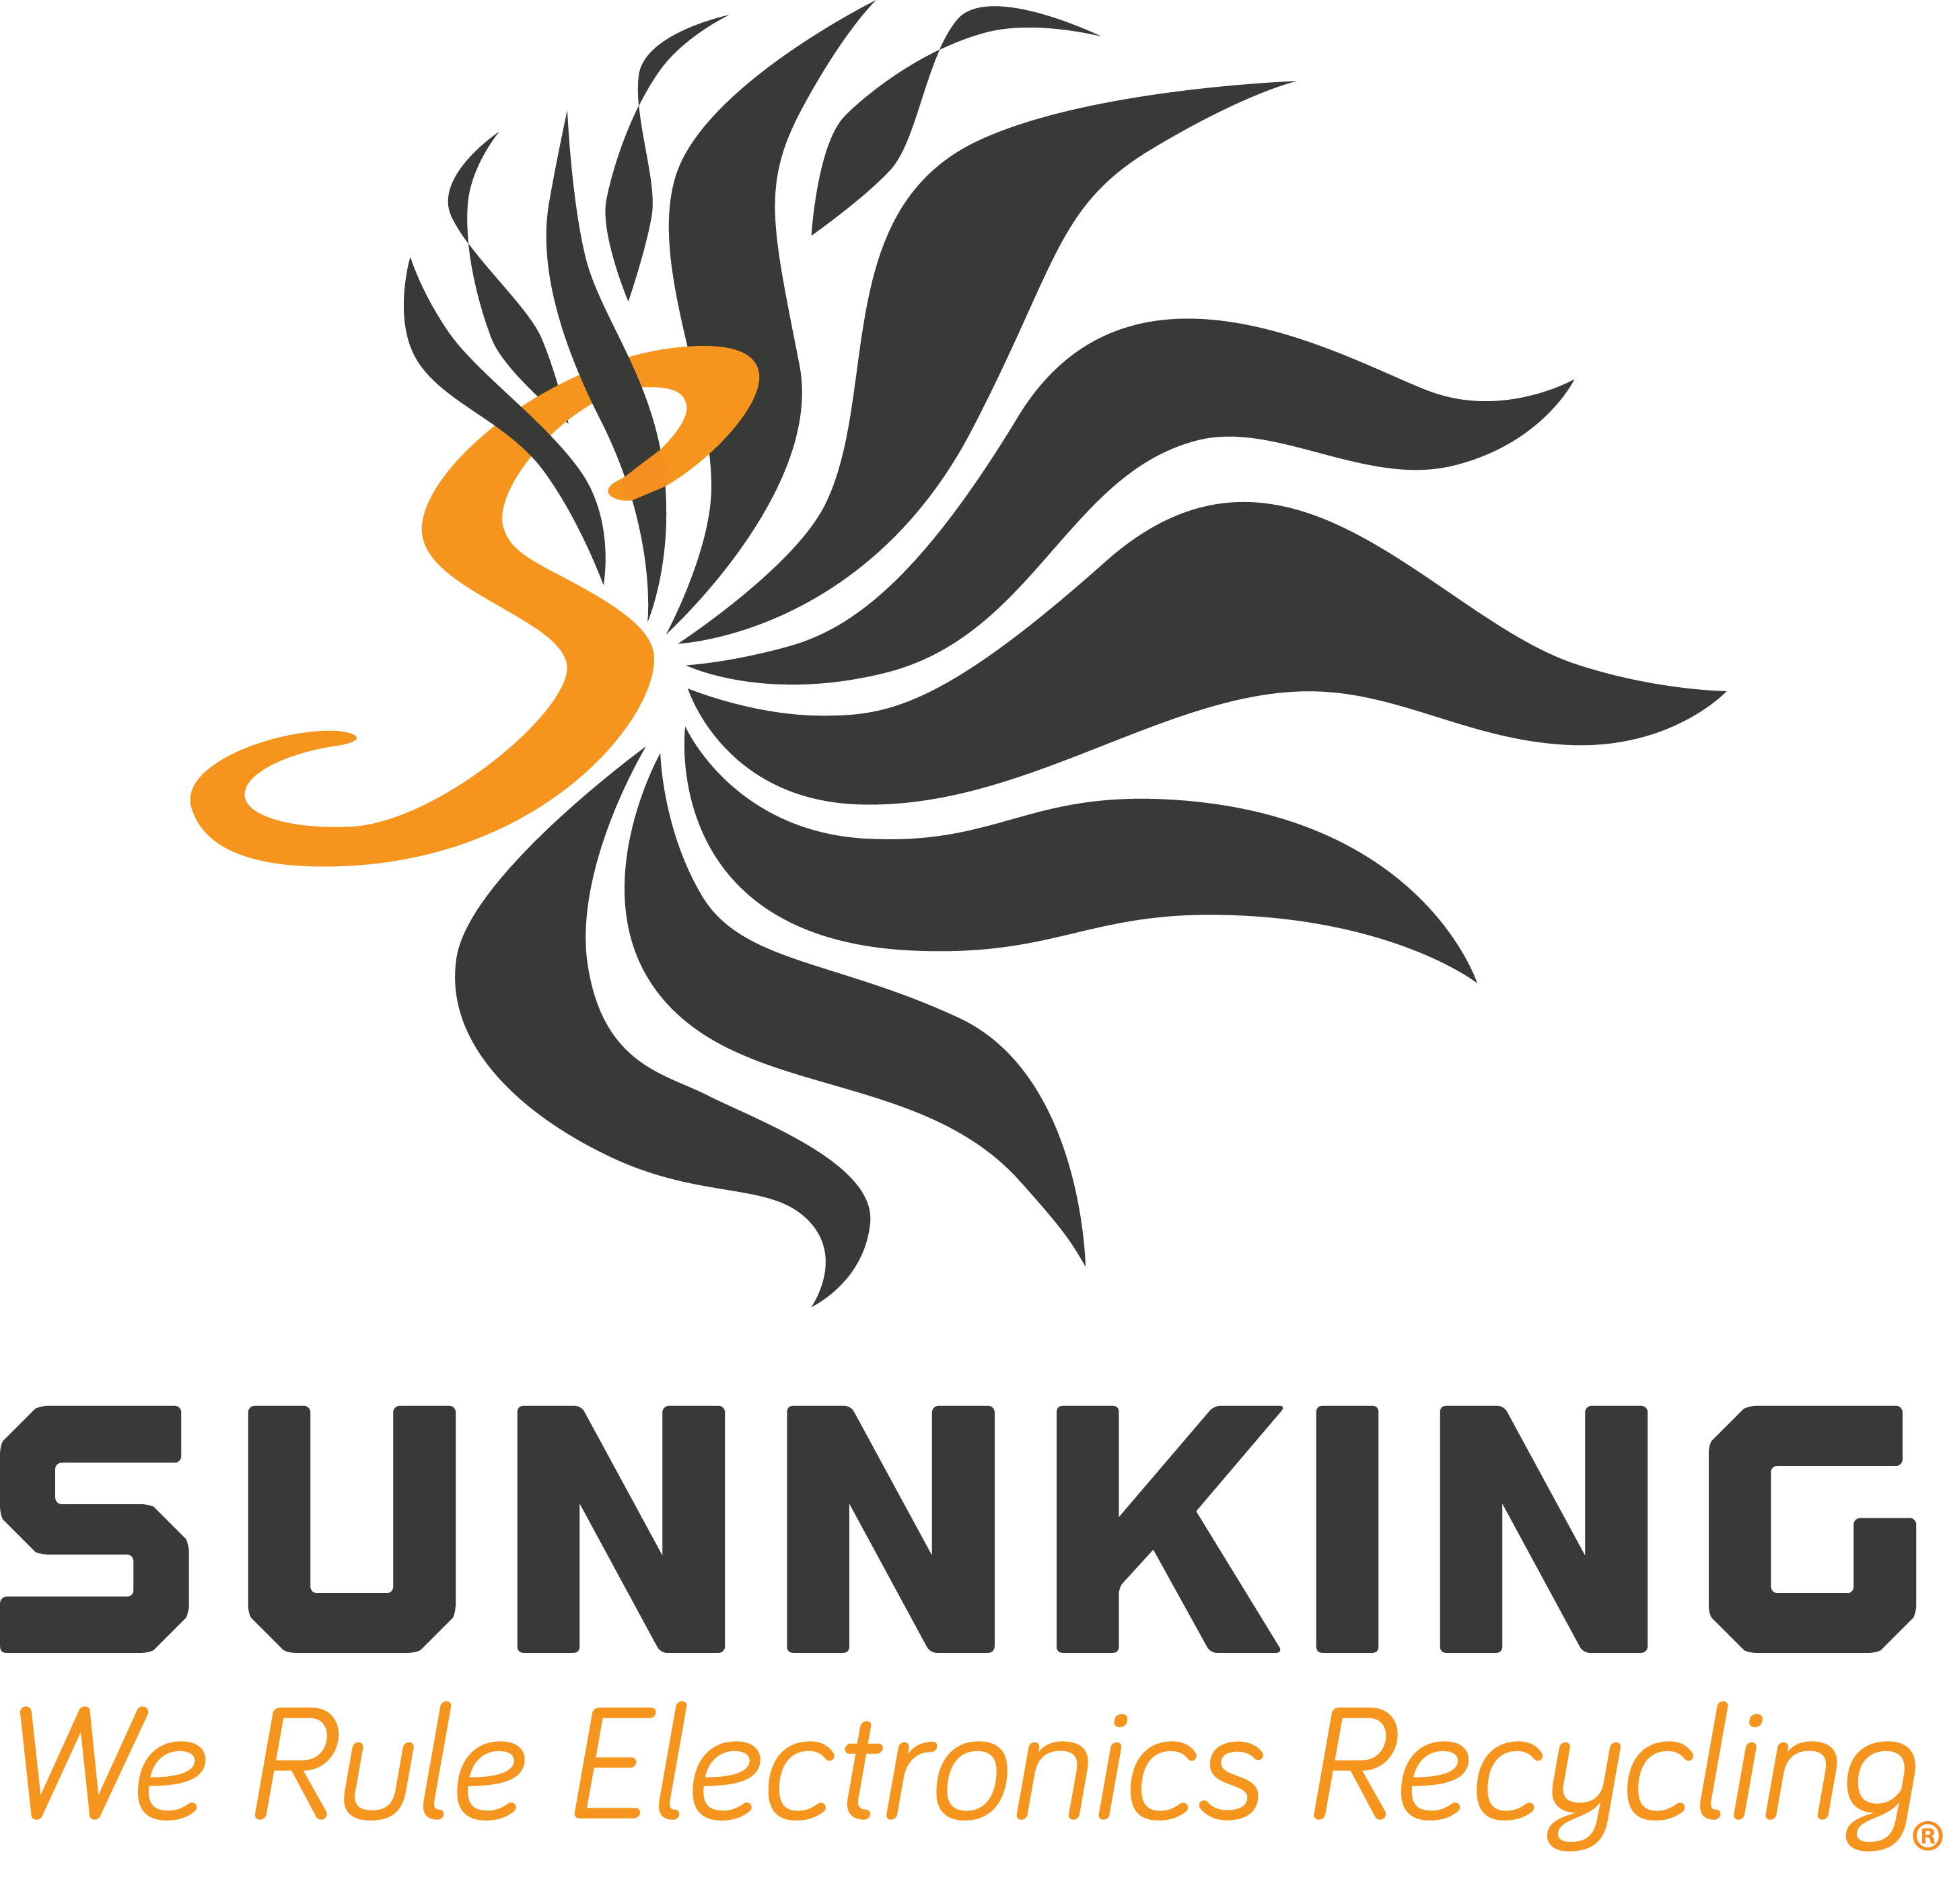 Sunnking Logo with Tag Line - "We Rule Electronics Recycling"